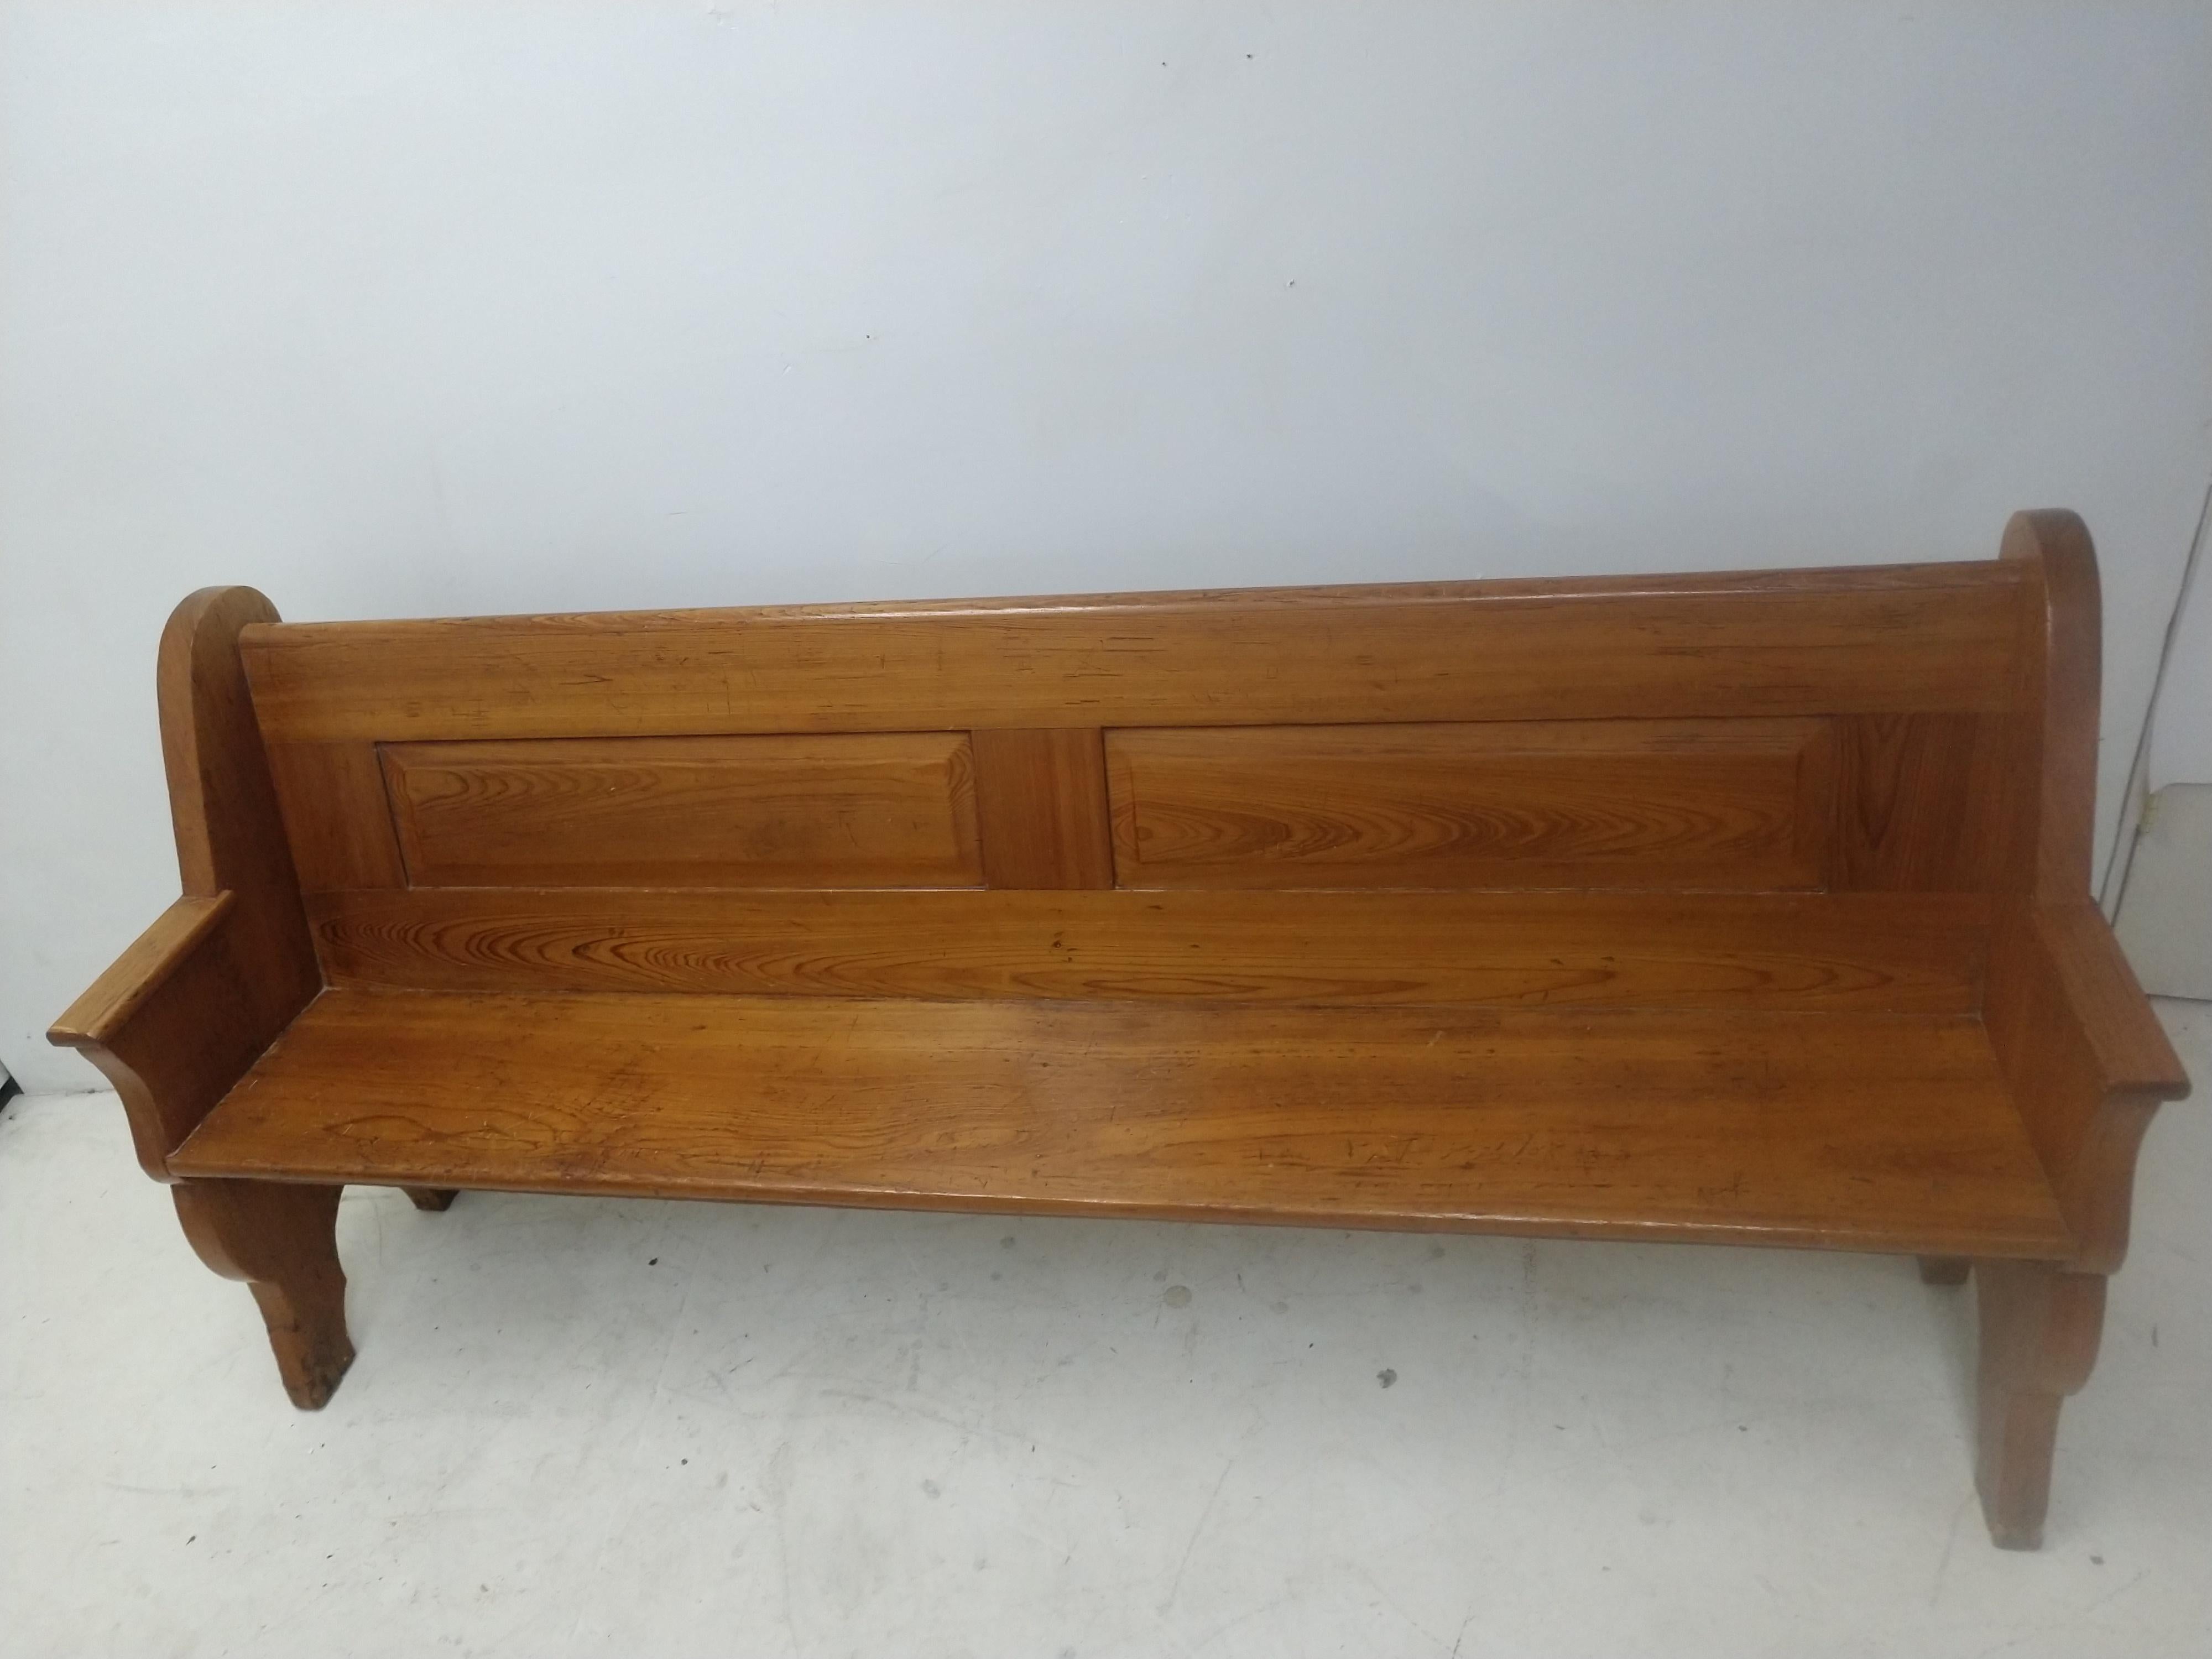 Fabulous chestnut pew with fully paneled back on both sides. Simple and elegant as the chestnut has mellowed and aged. A little under six and a half feet makes it very useful in everyday situations. Dining, study, or on a porch. Seat height is